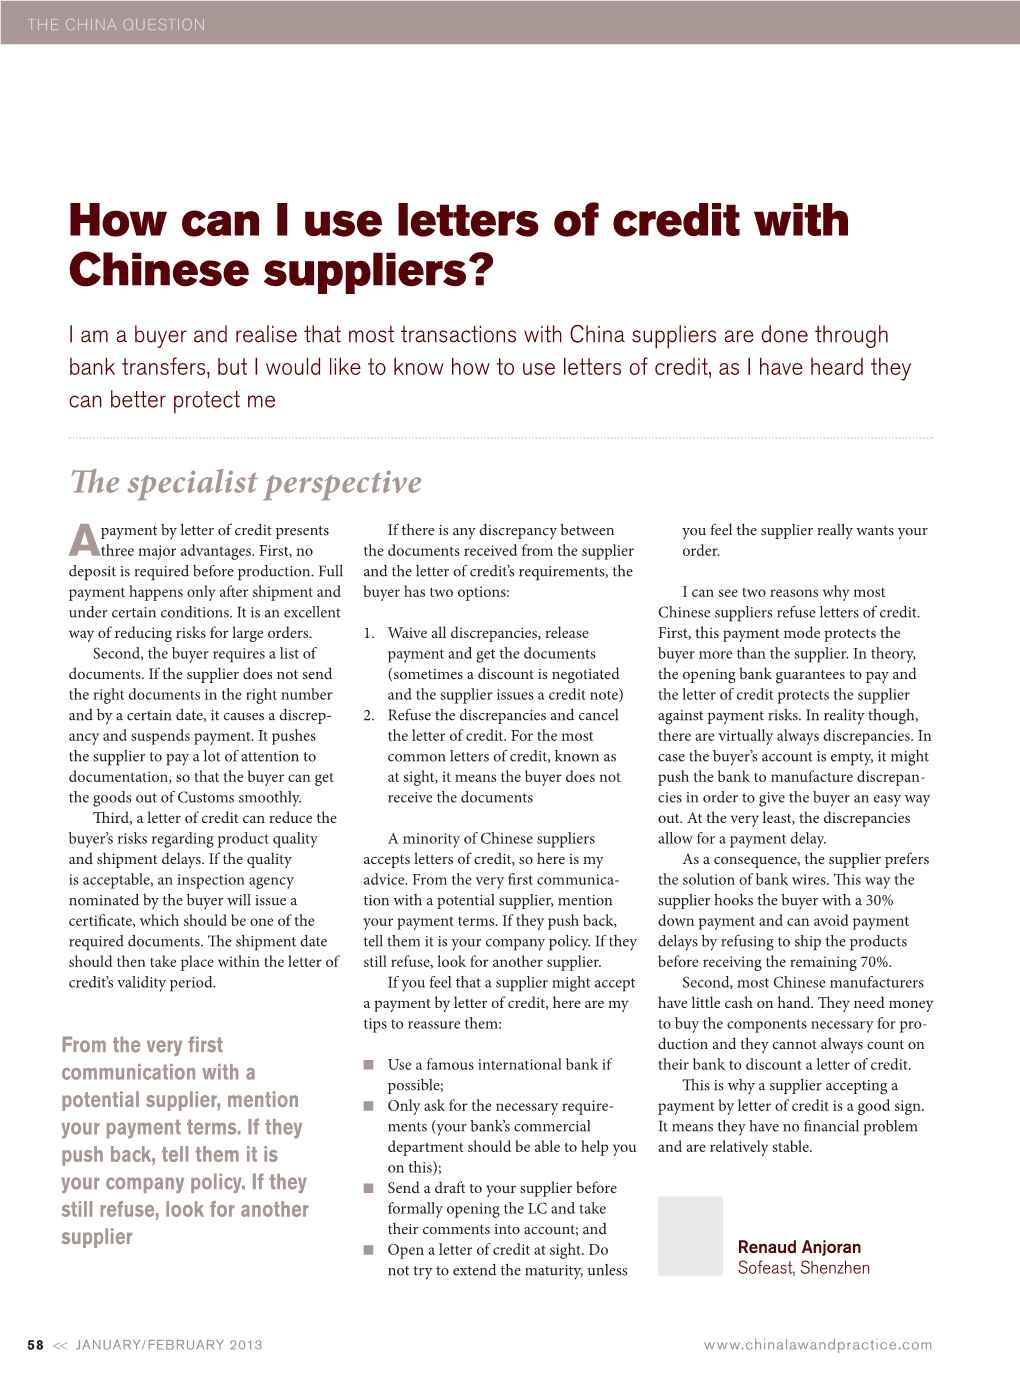 How Can I Use Letters of Credit with Chinese Suppliers?